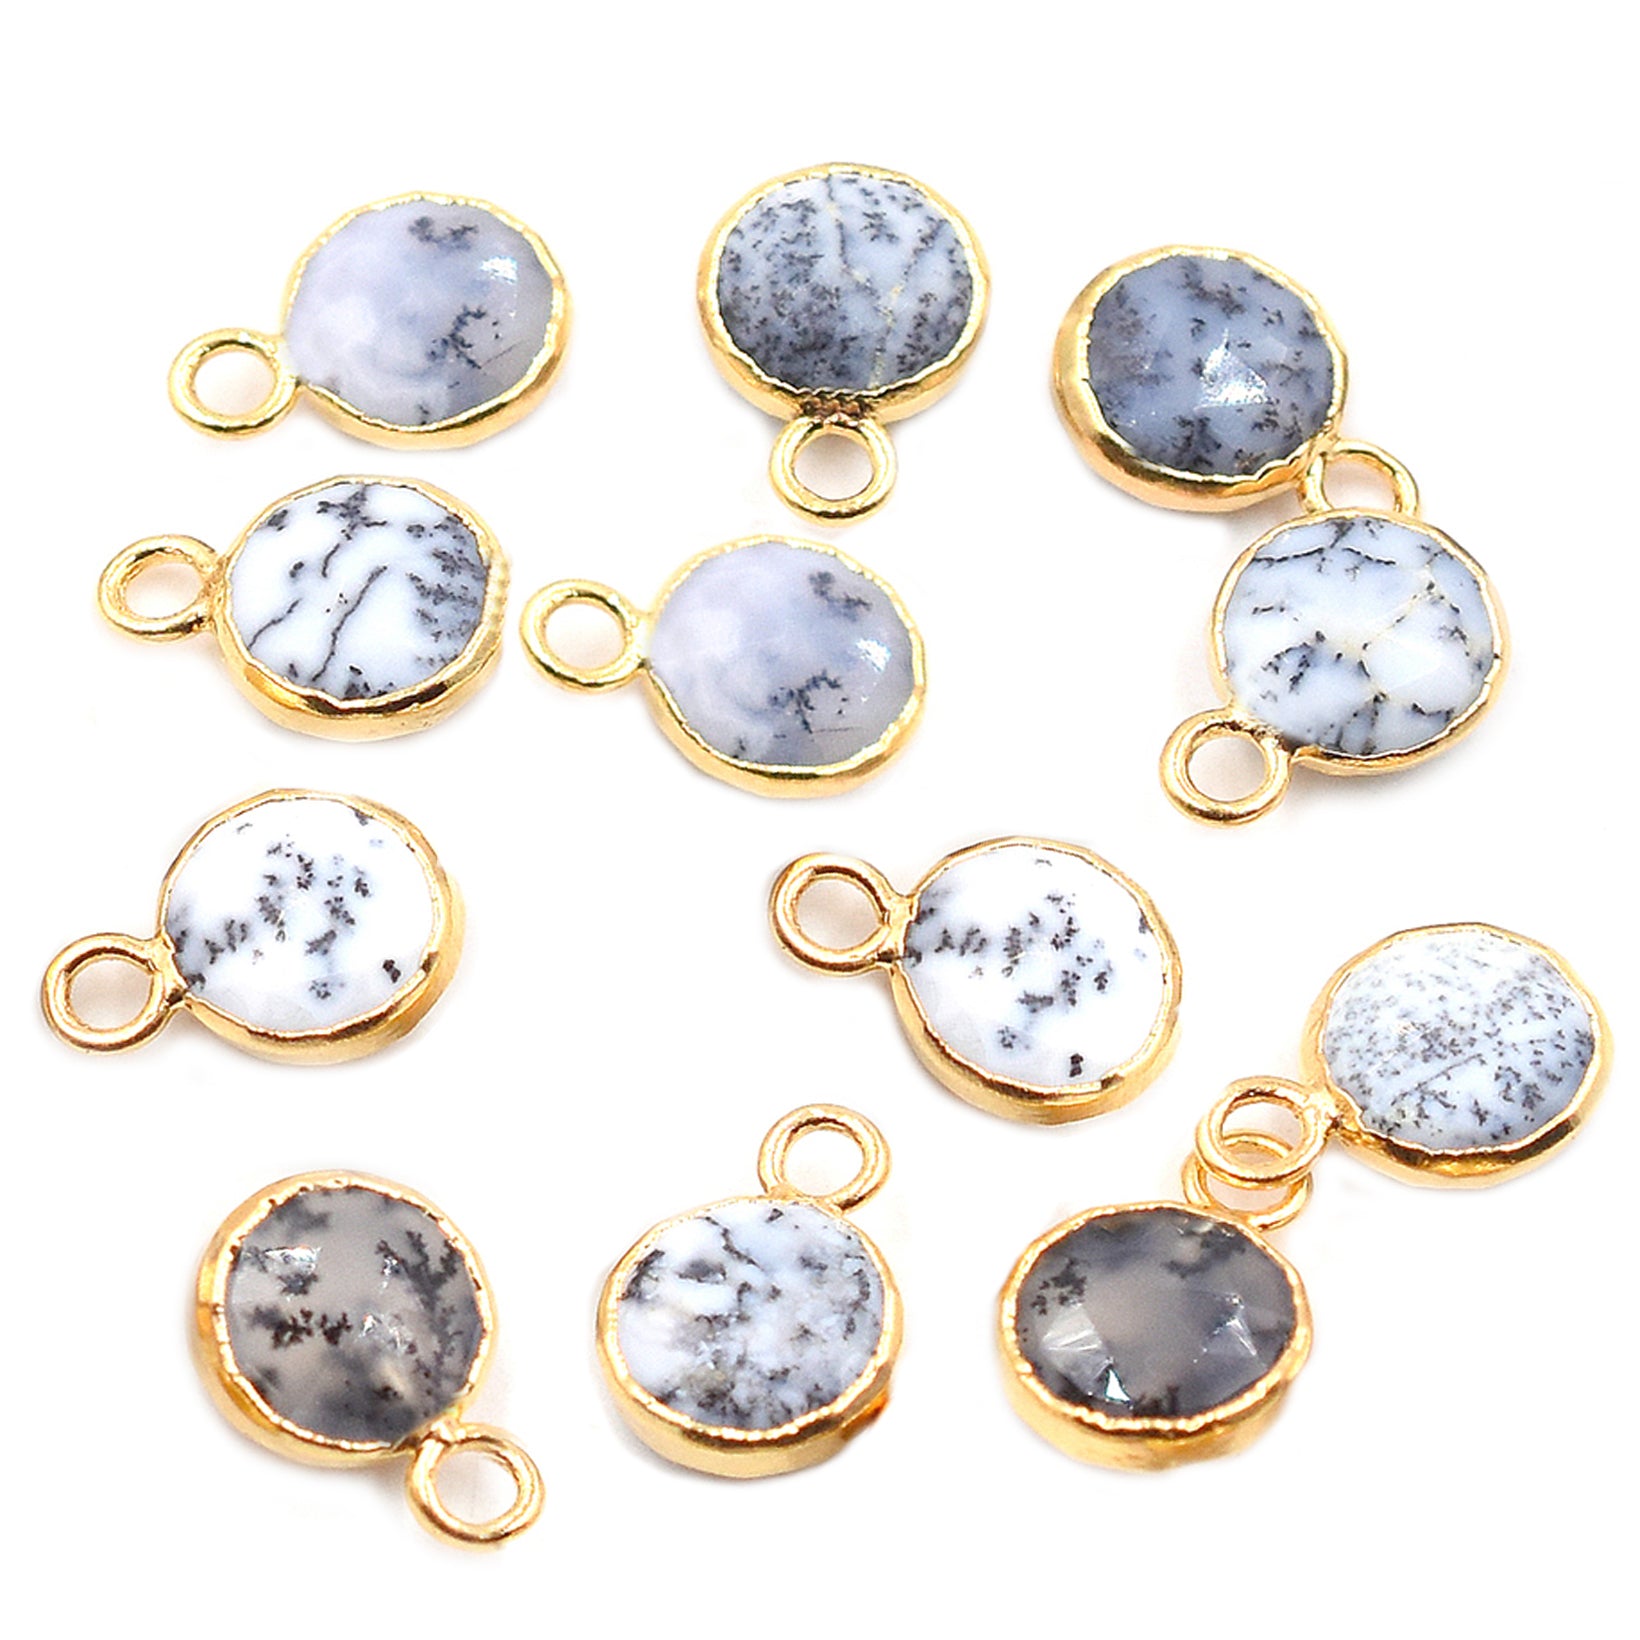 Dendritic Opal 6 To 7 MM Round Shape Gold Electroplated Pendant (Set Of 2 Pcs)